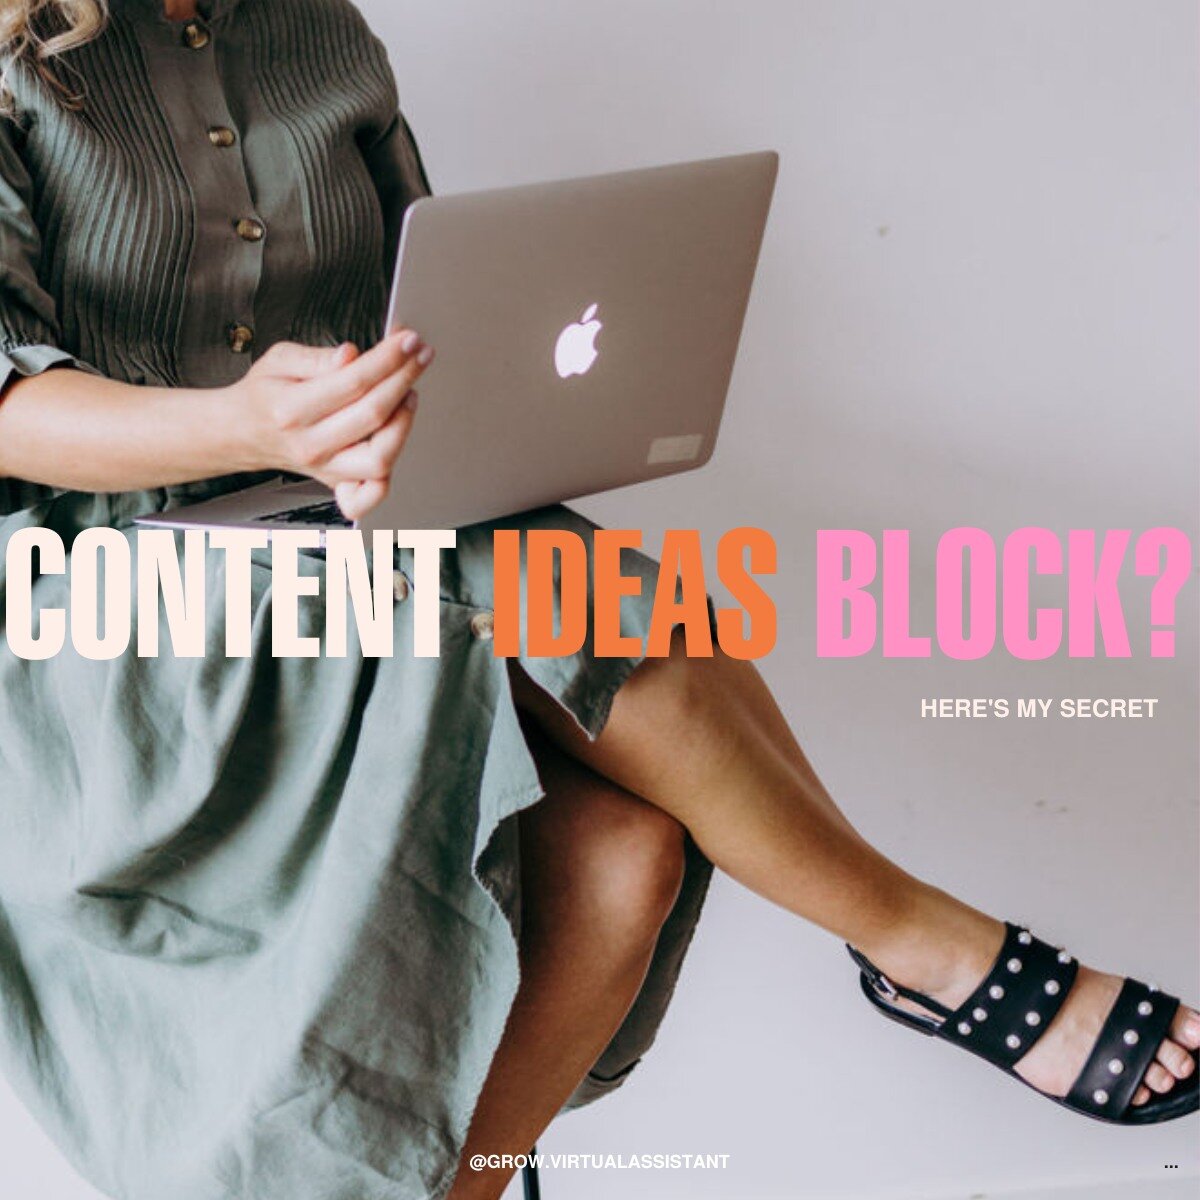 Content ideas block? We've all been there, right? Well, I've got a trick up my sleeve to conquer it and generate VALUE-packed content ideas. 

Here's my secret:
🚀 I tap into the power of perspective. Whether it's consulting a client or seeking insig